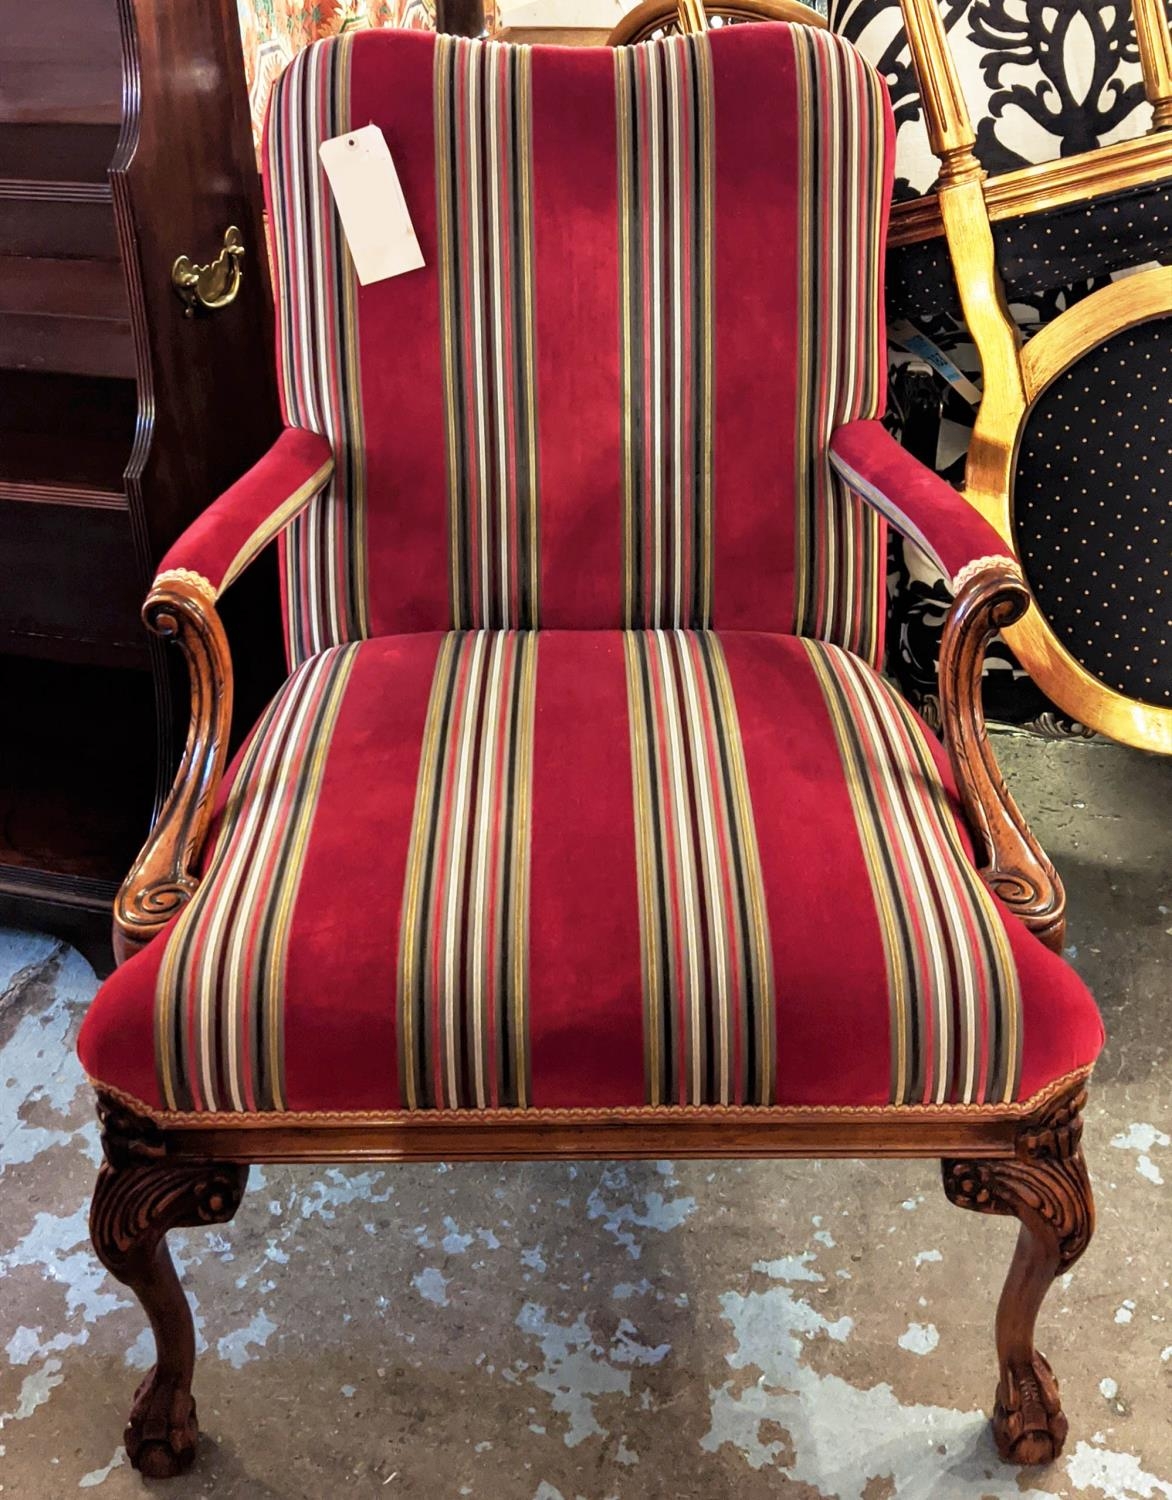 ARMCHAIR, 76cm W x 98cm H, Georgian style with striped velvet fabric and carved showframe. - Image 2 of 6